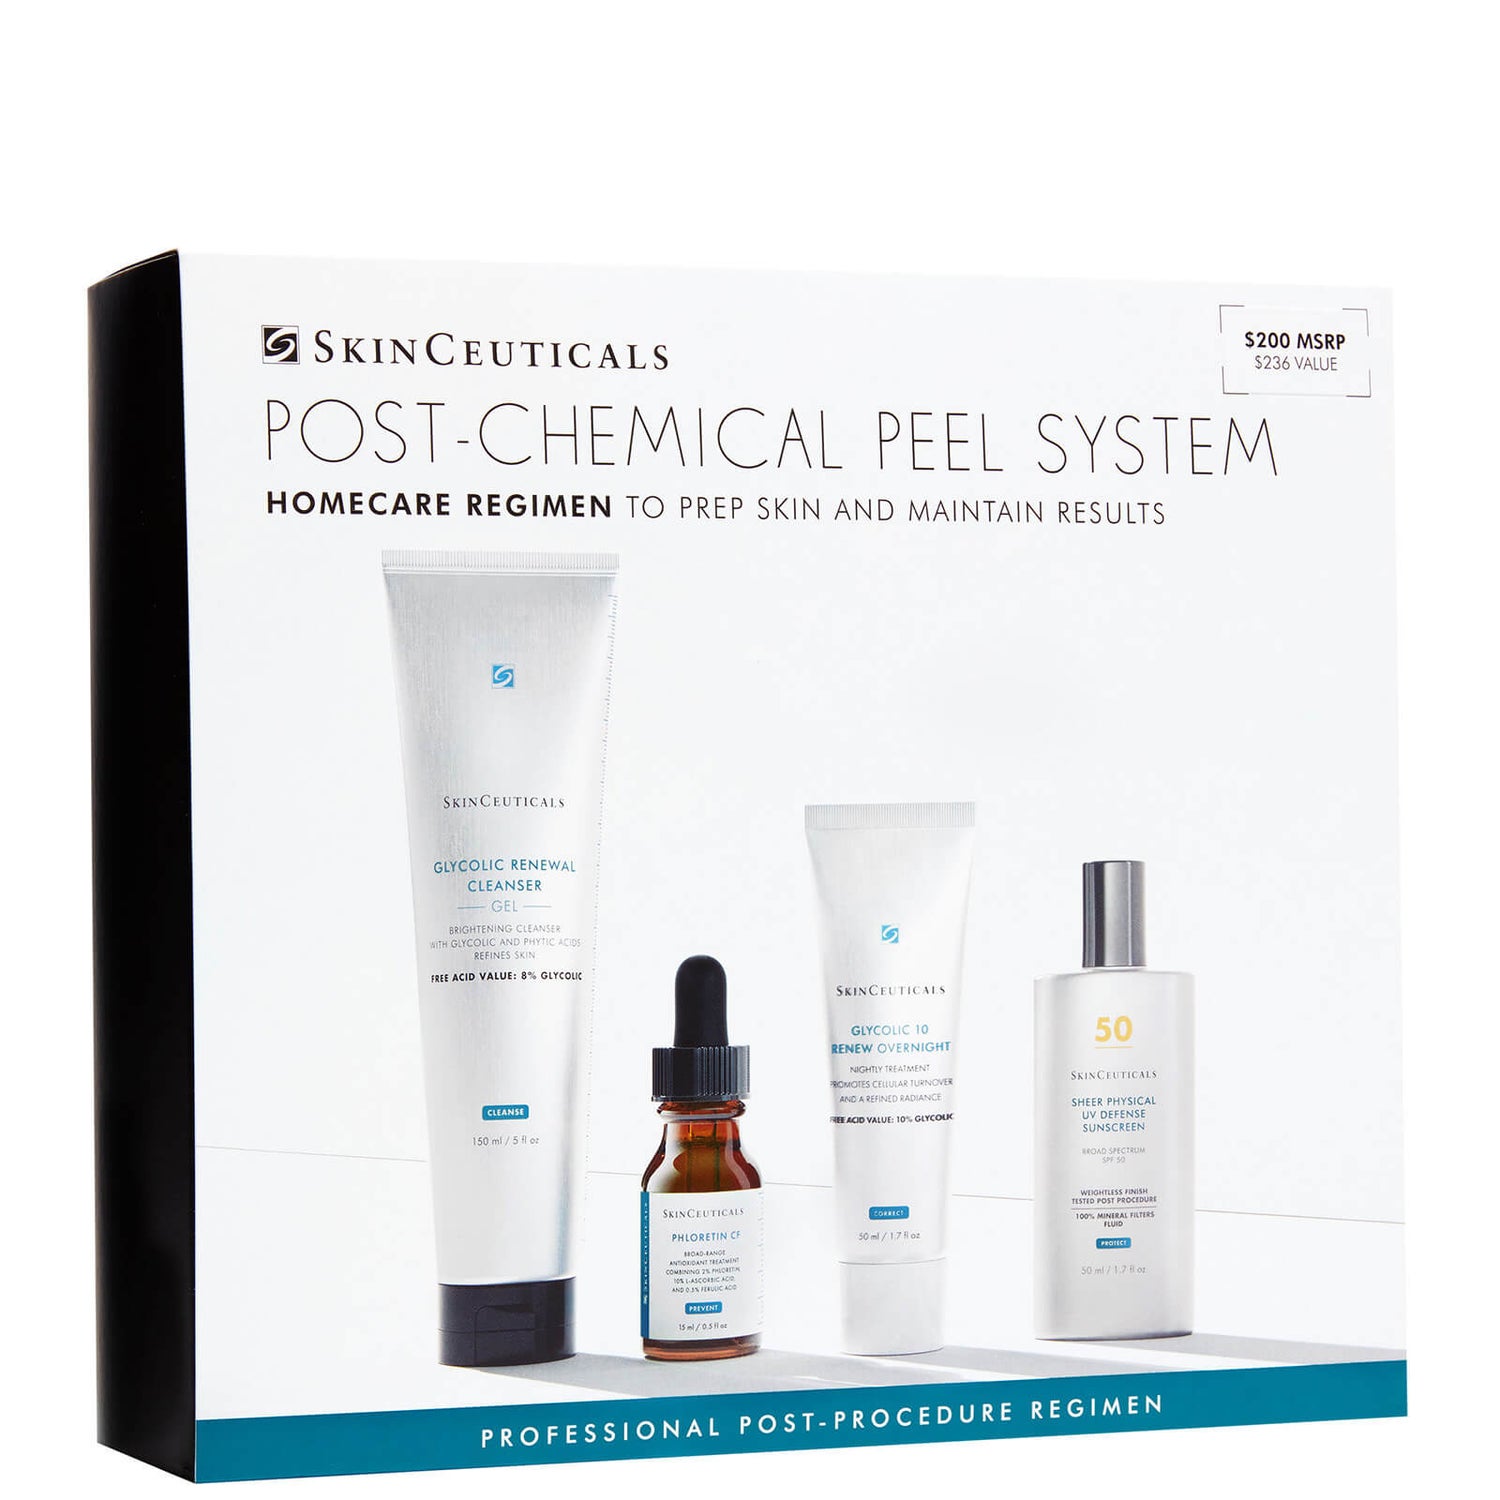 SkinCeuticals Post-Chemical Peel System